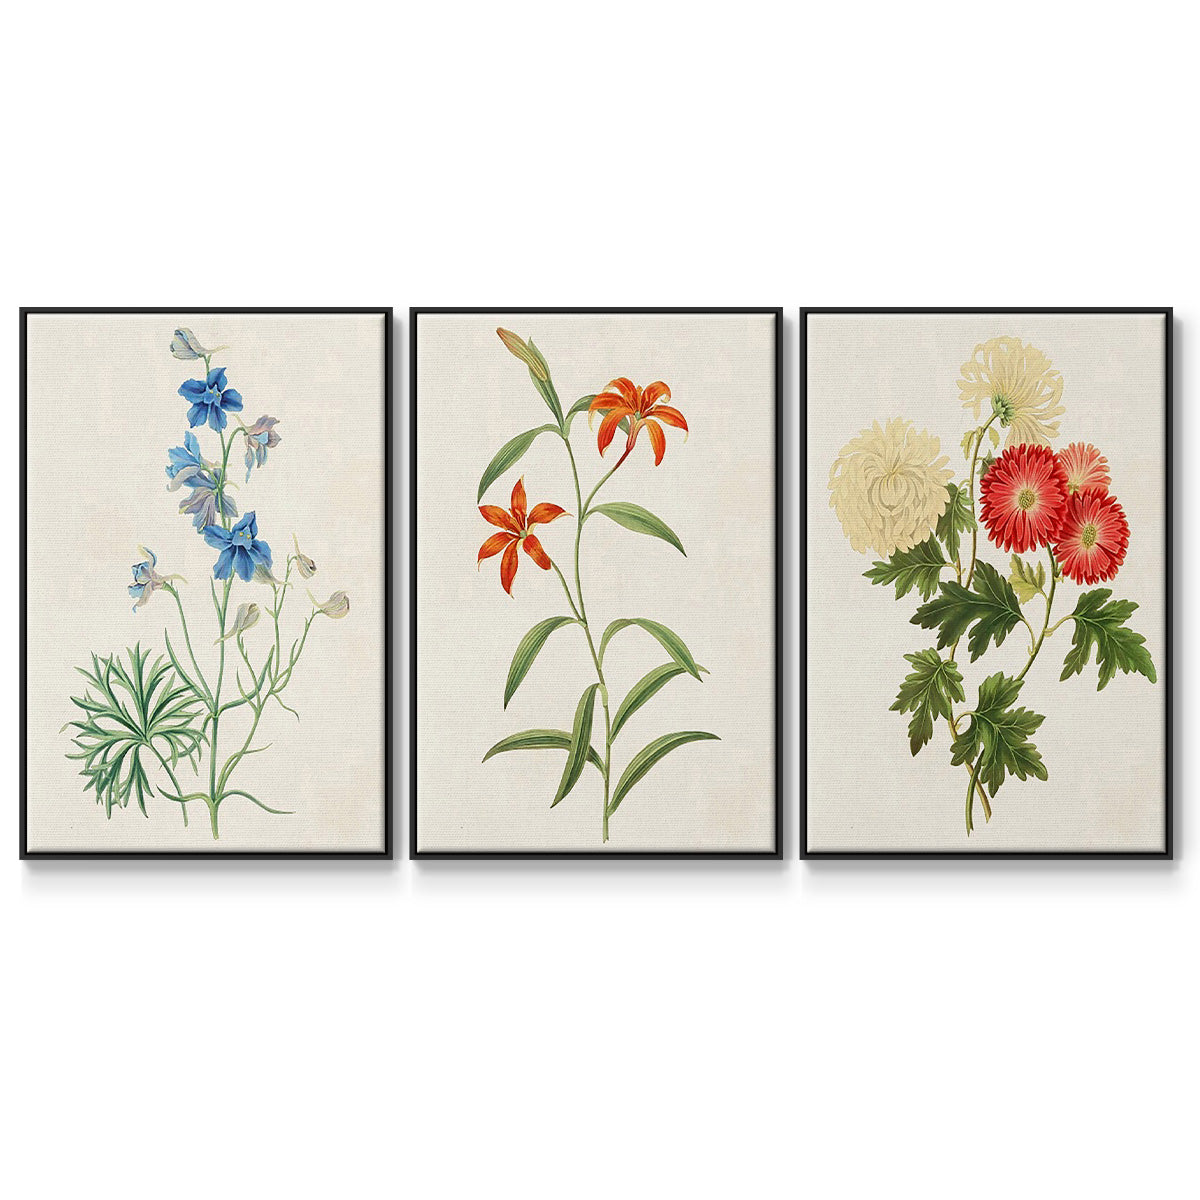 Flowers of the Seasons I - Framed Premium Gallery Wrapped Canvas L Frame 3 Piece Set - Ready to Hang